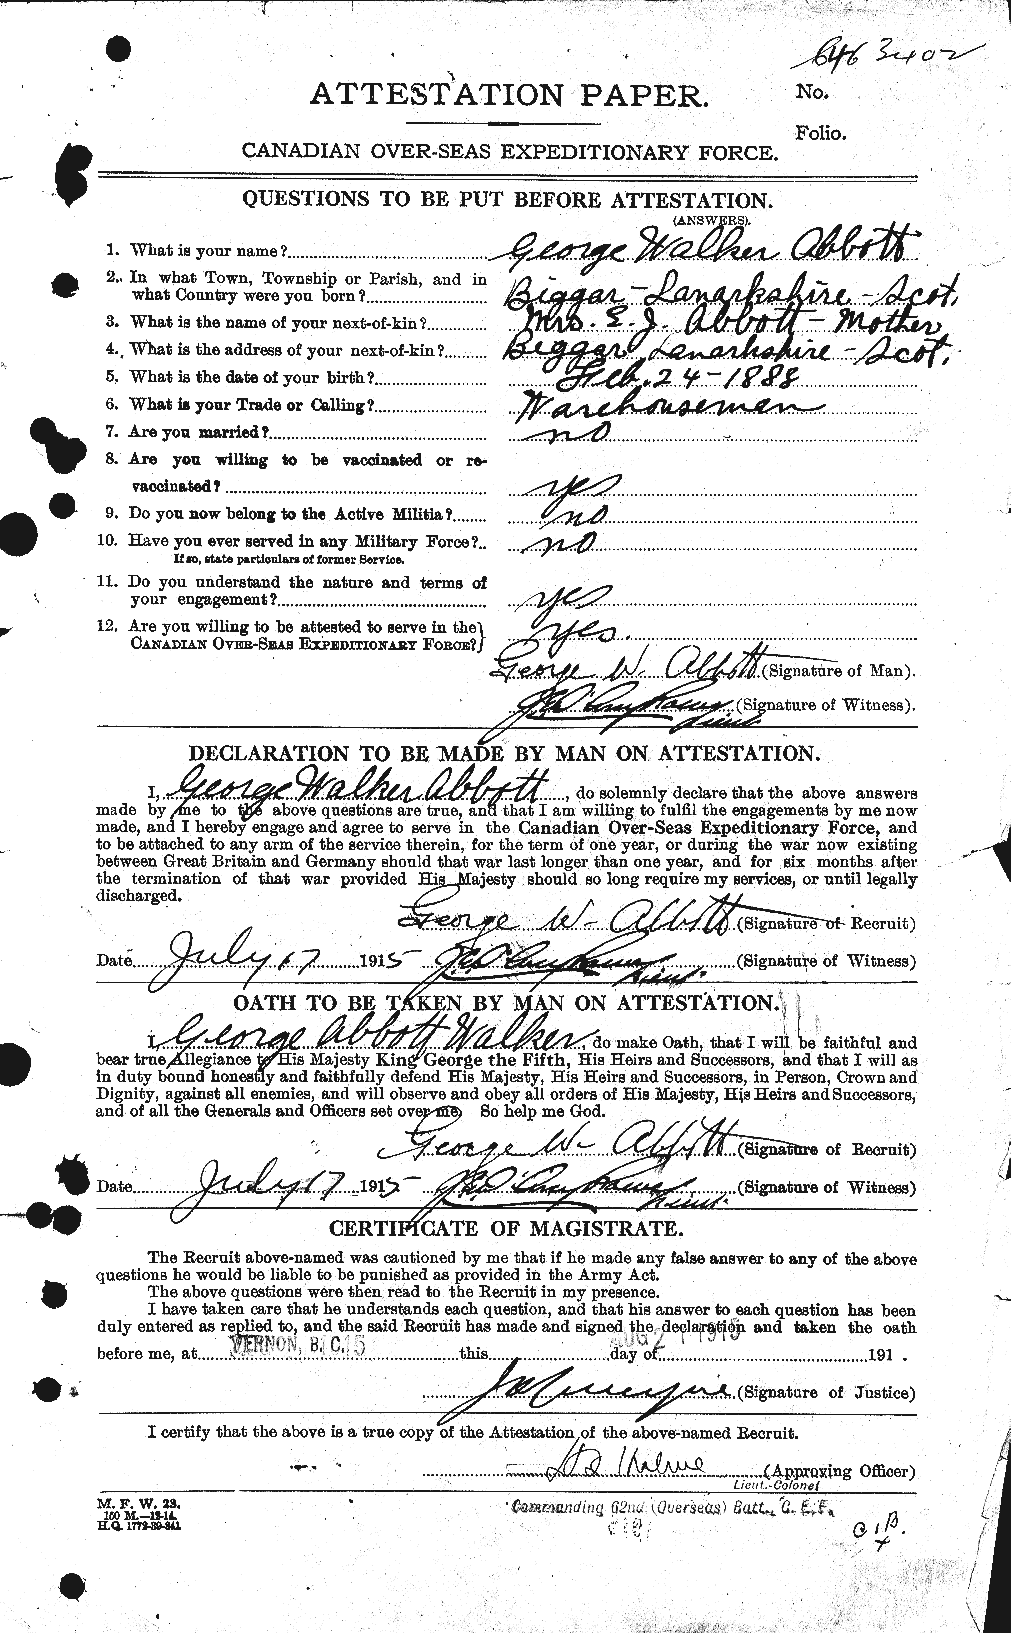 Personnel Records of the First World War - CEF 200946a